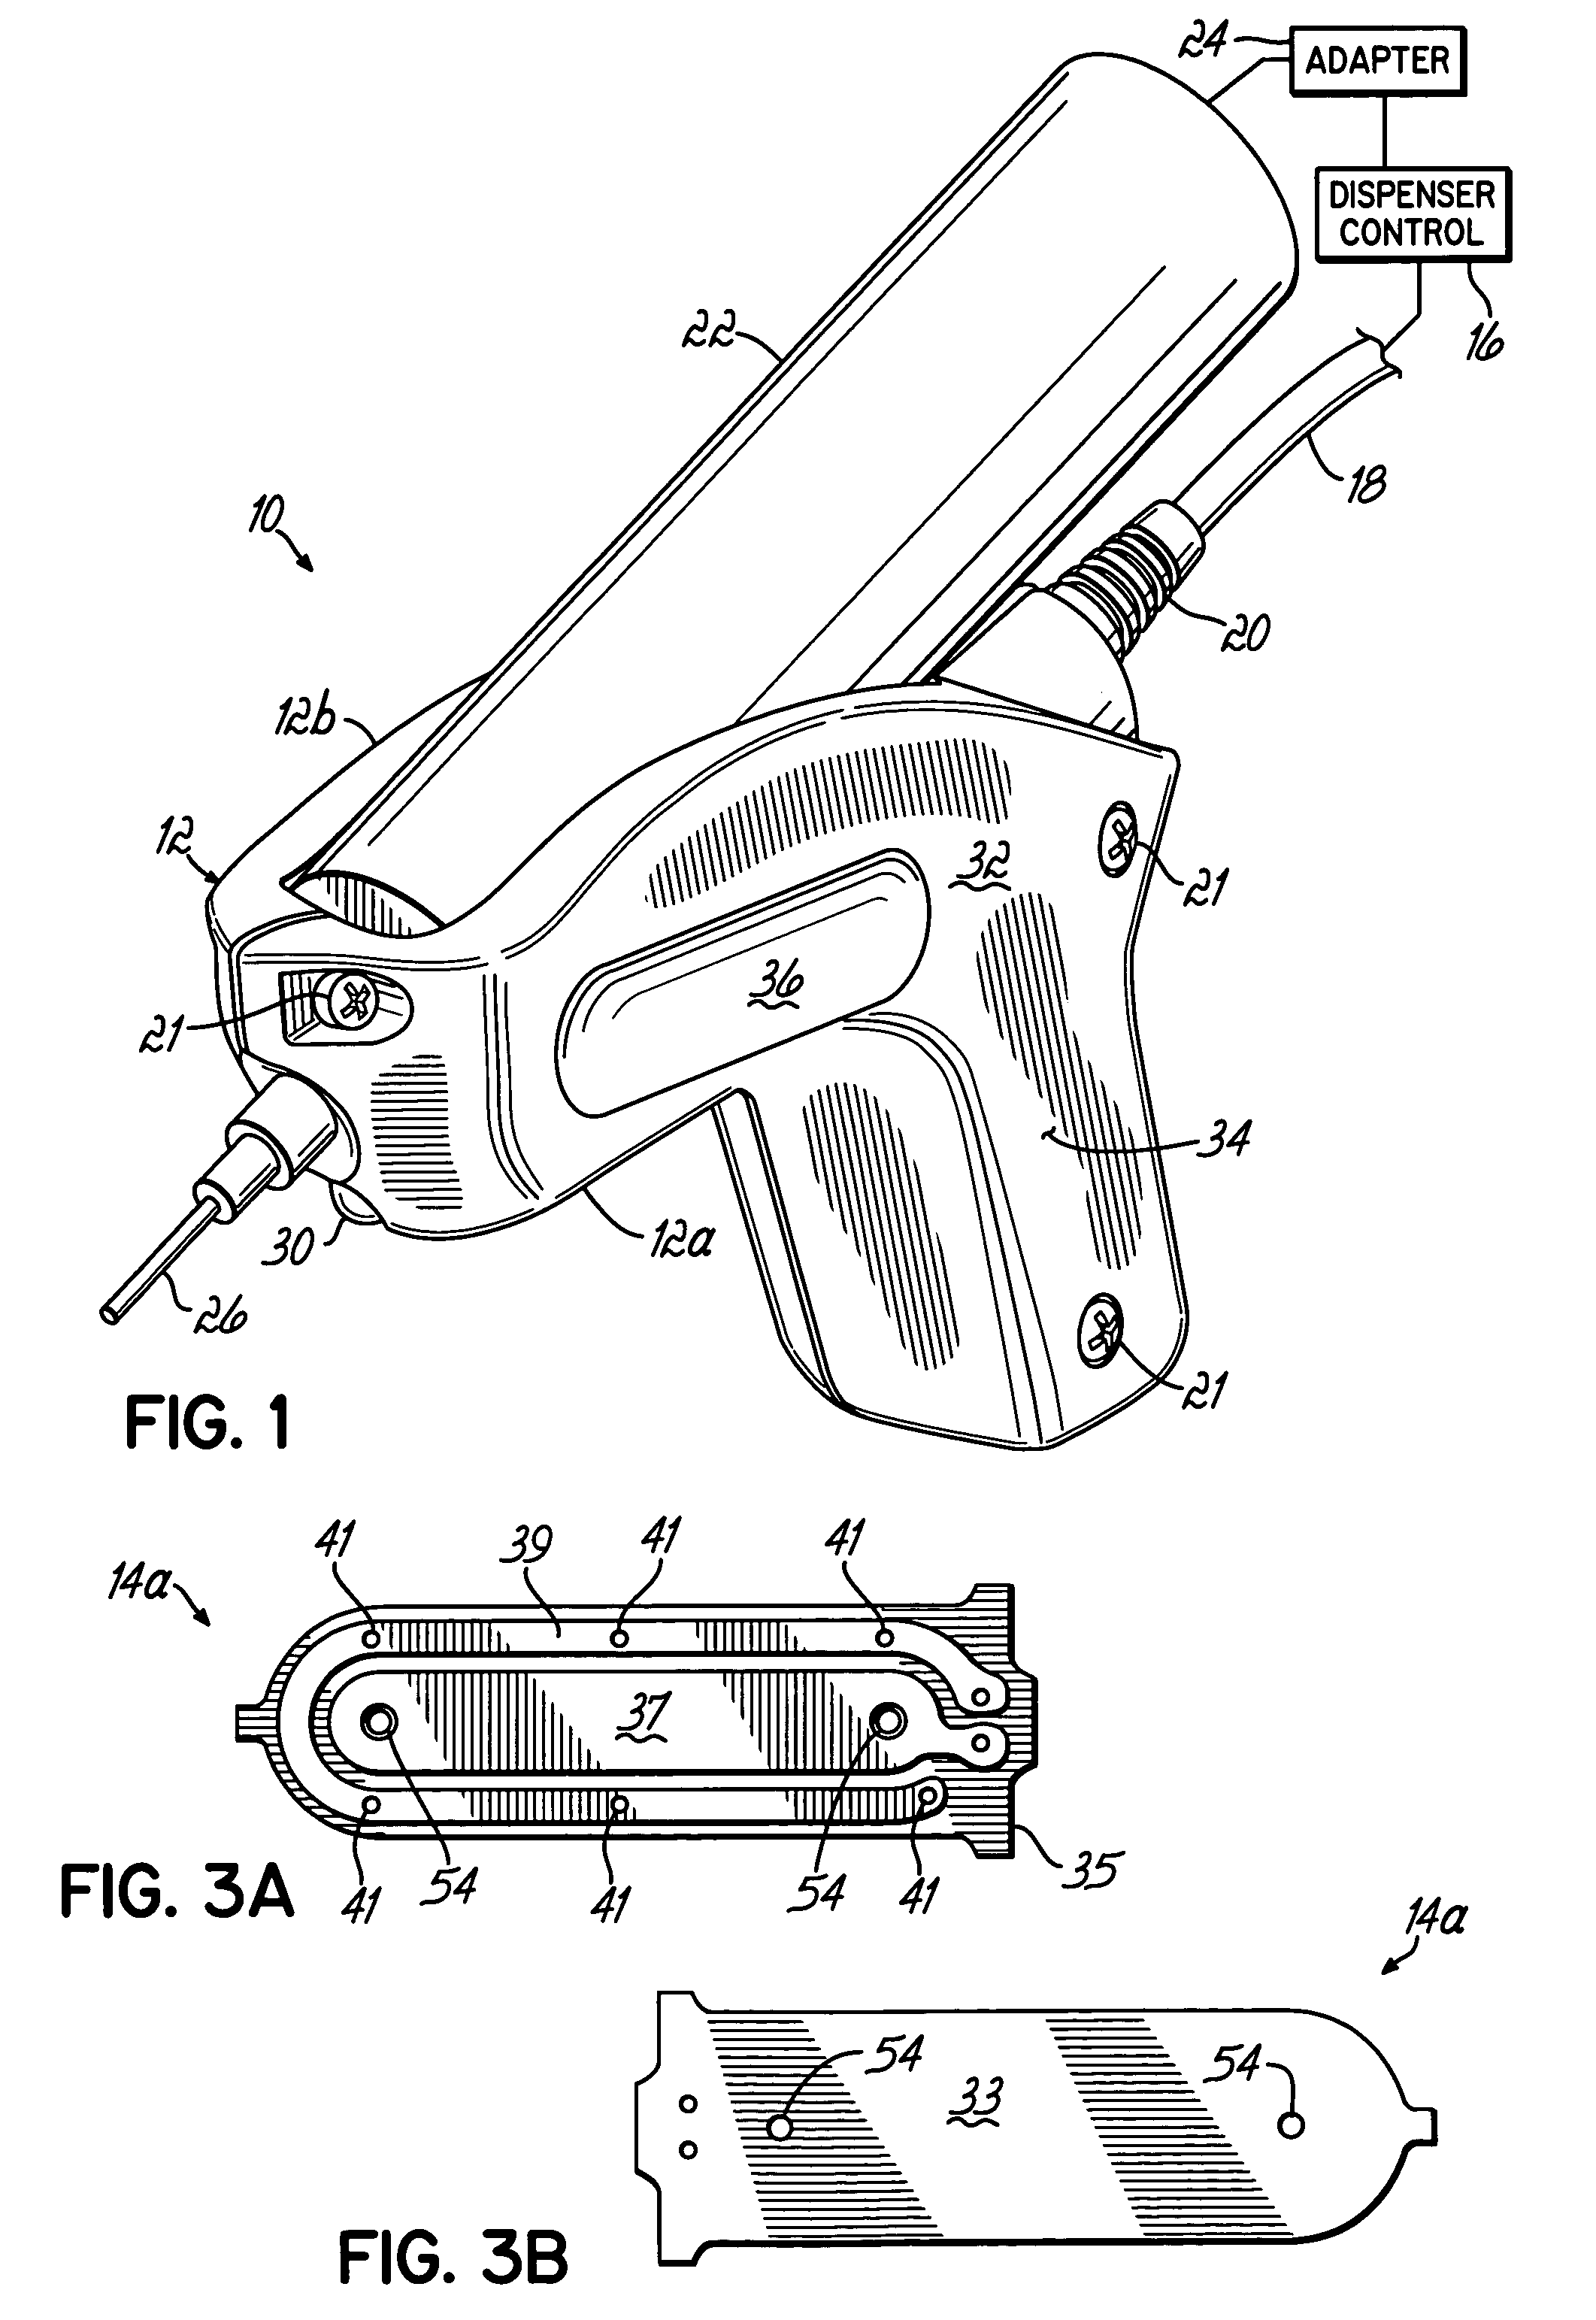 Hand-held fluid dispenser system and method of operating hand-held fluid dispenser systems